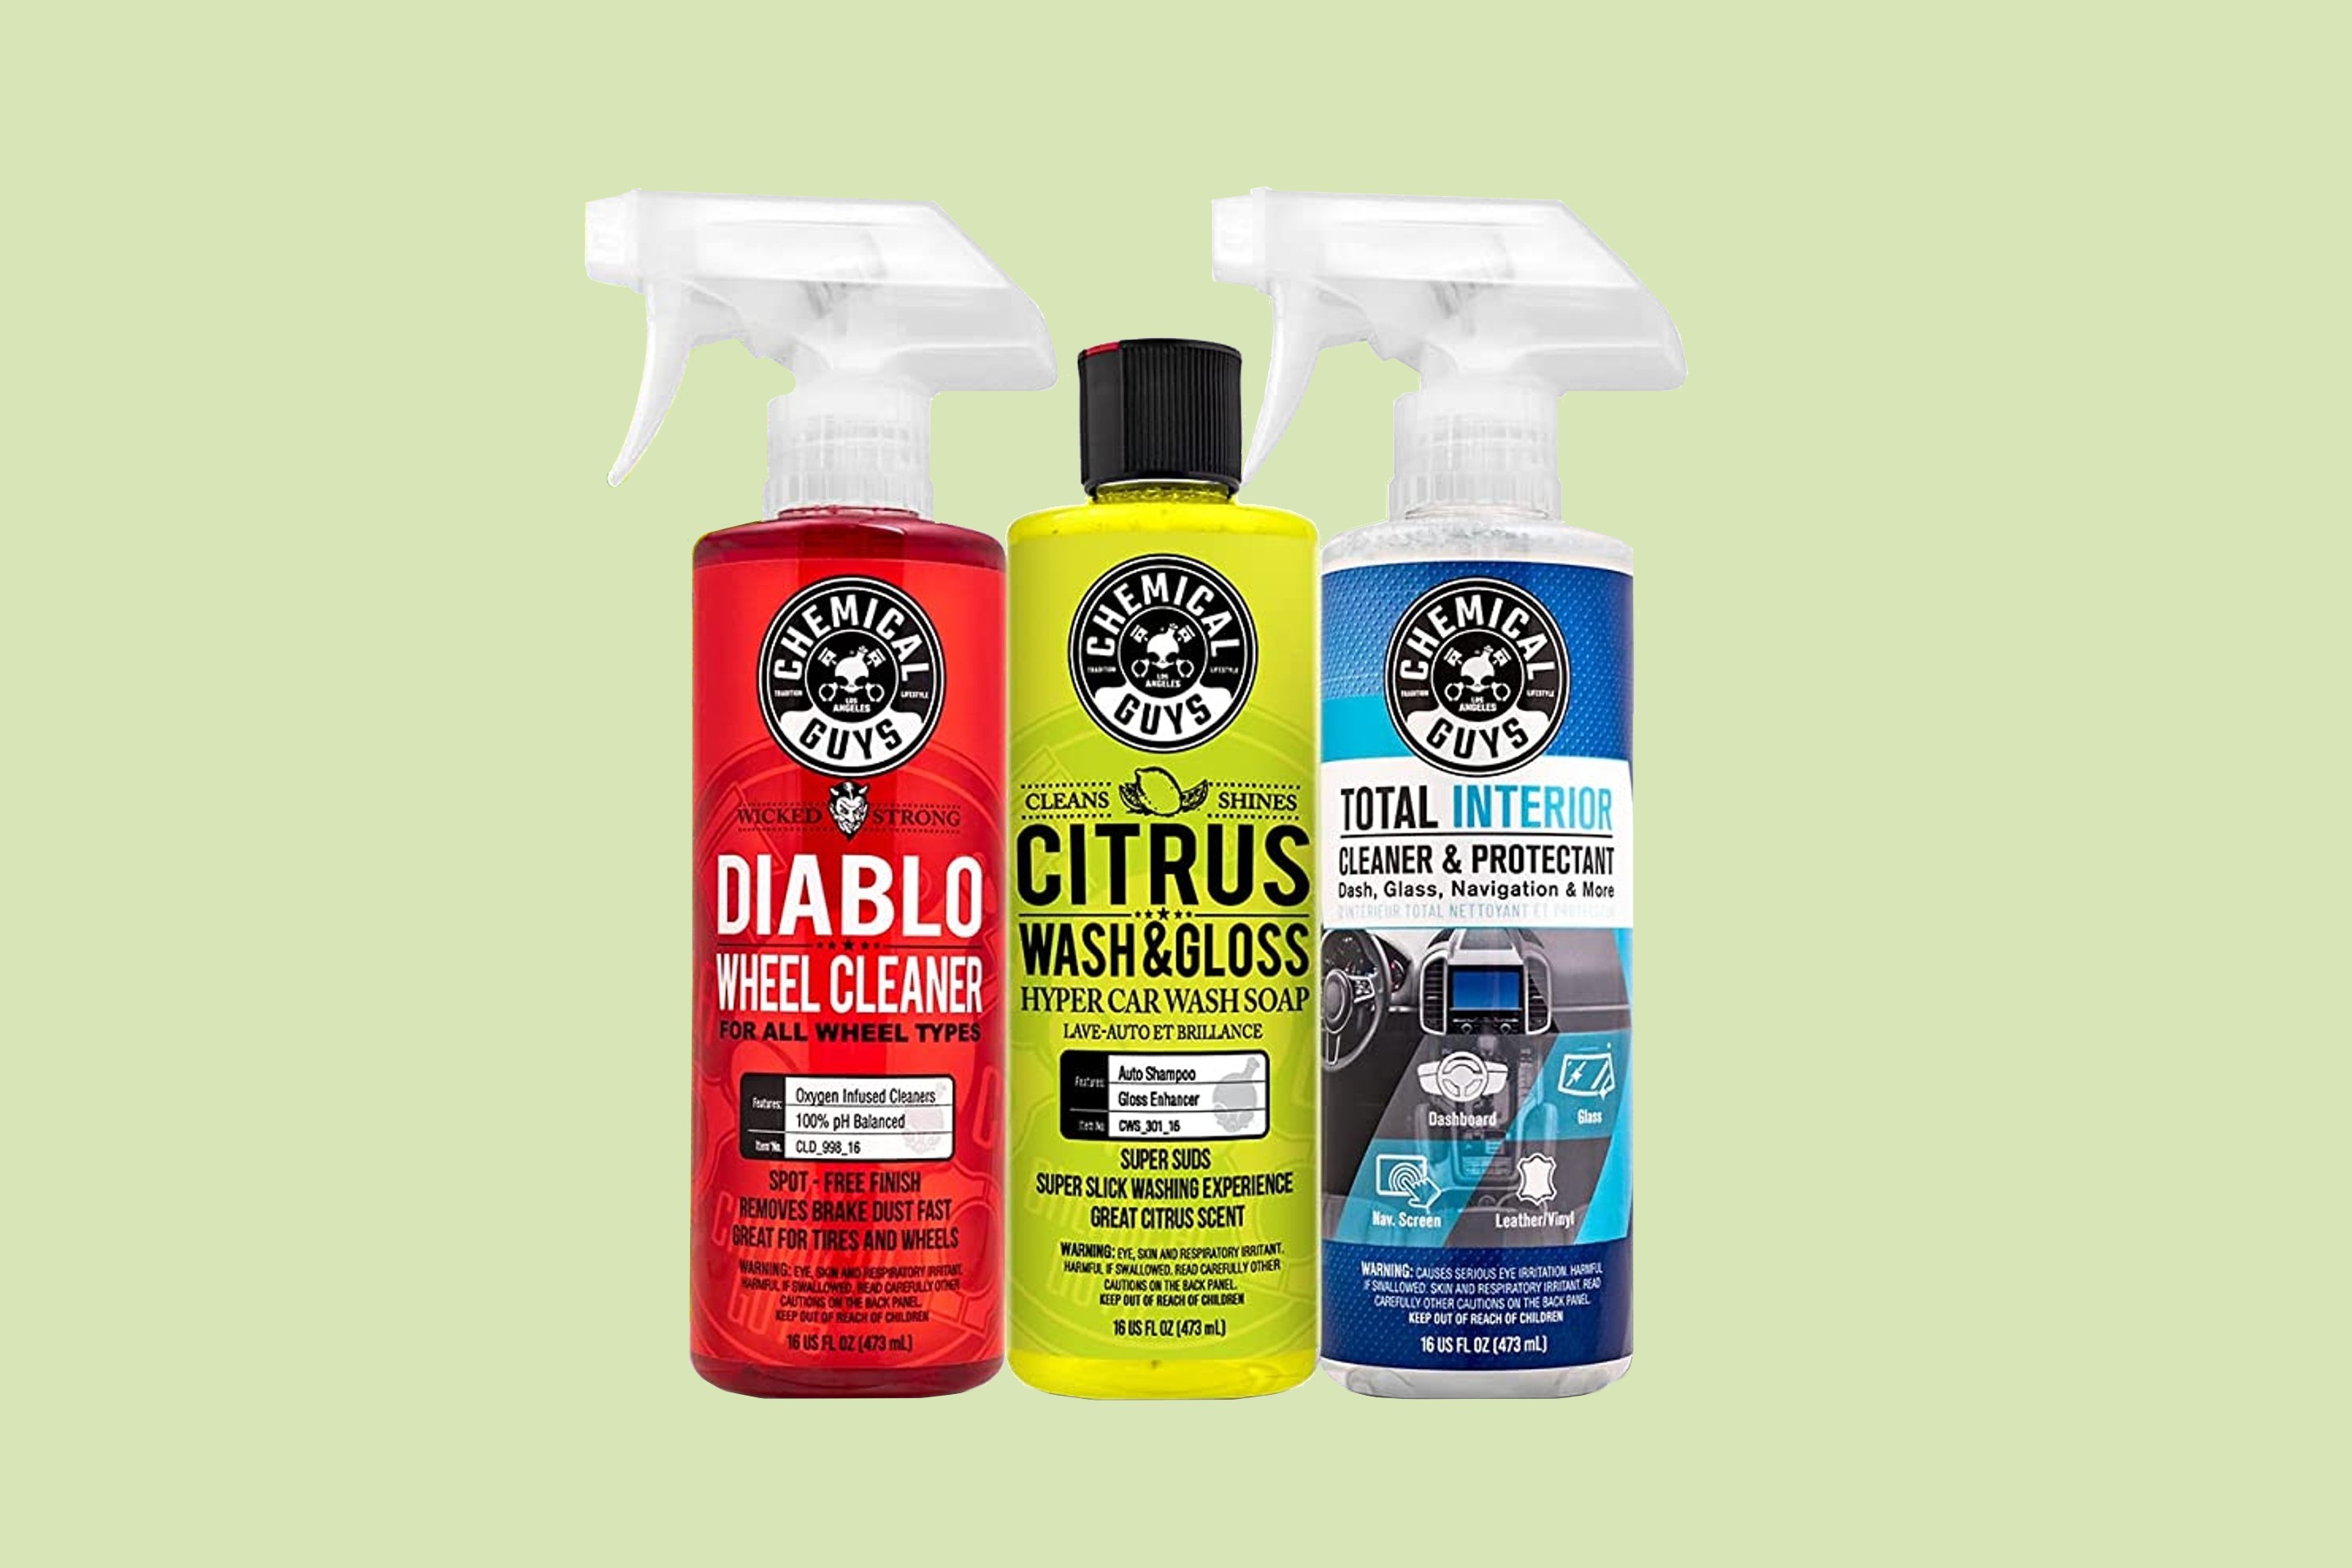 Get Car Wash-Level Shine at Home with 25% off Car Cleaning Essentials from Chemical Guys